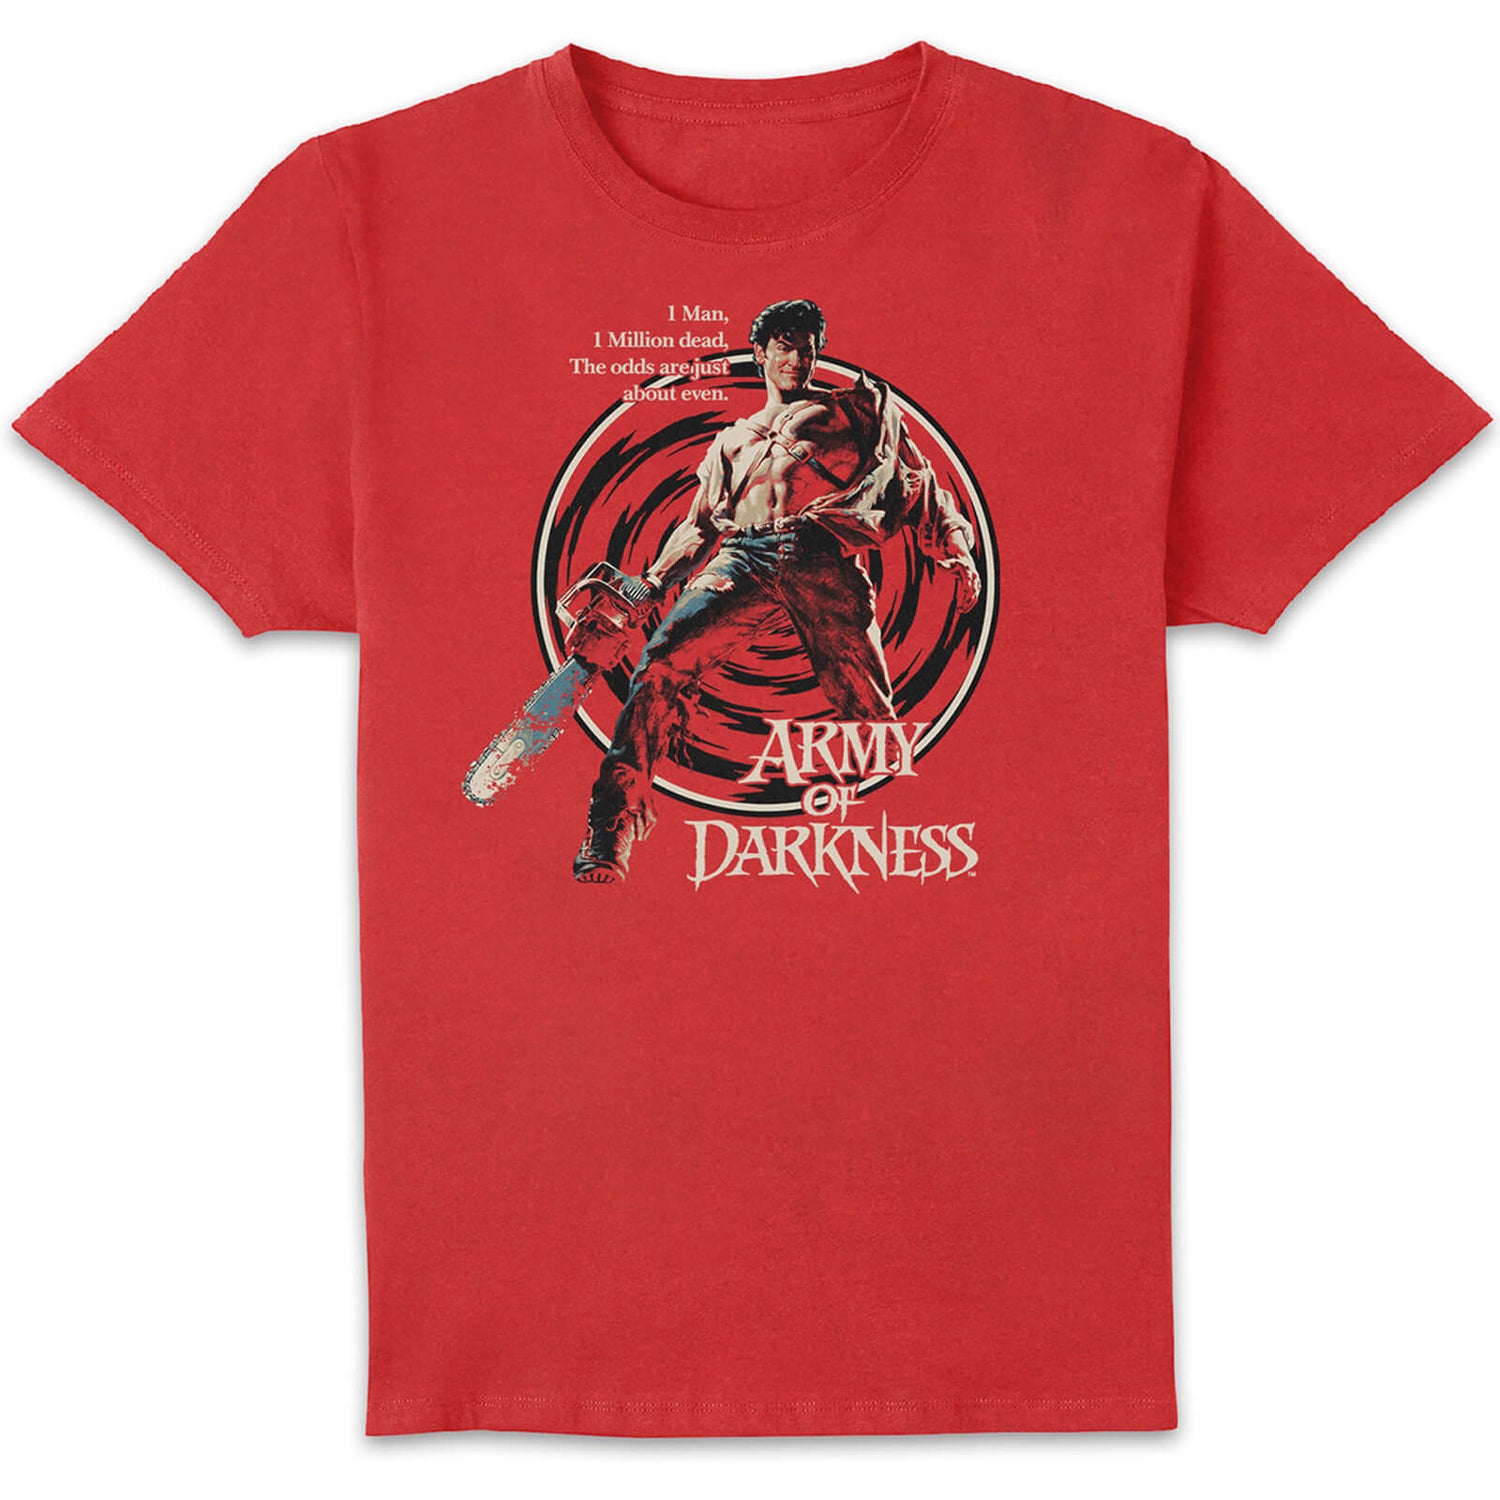 Army Of Darkness Hail To The King Unisex T-Shirt - Red